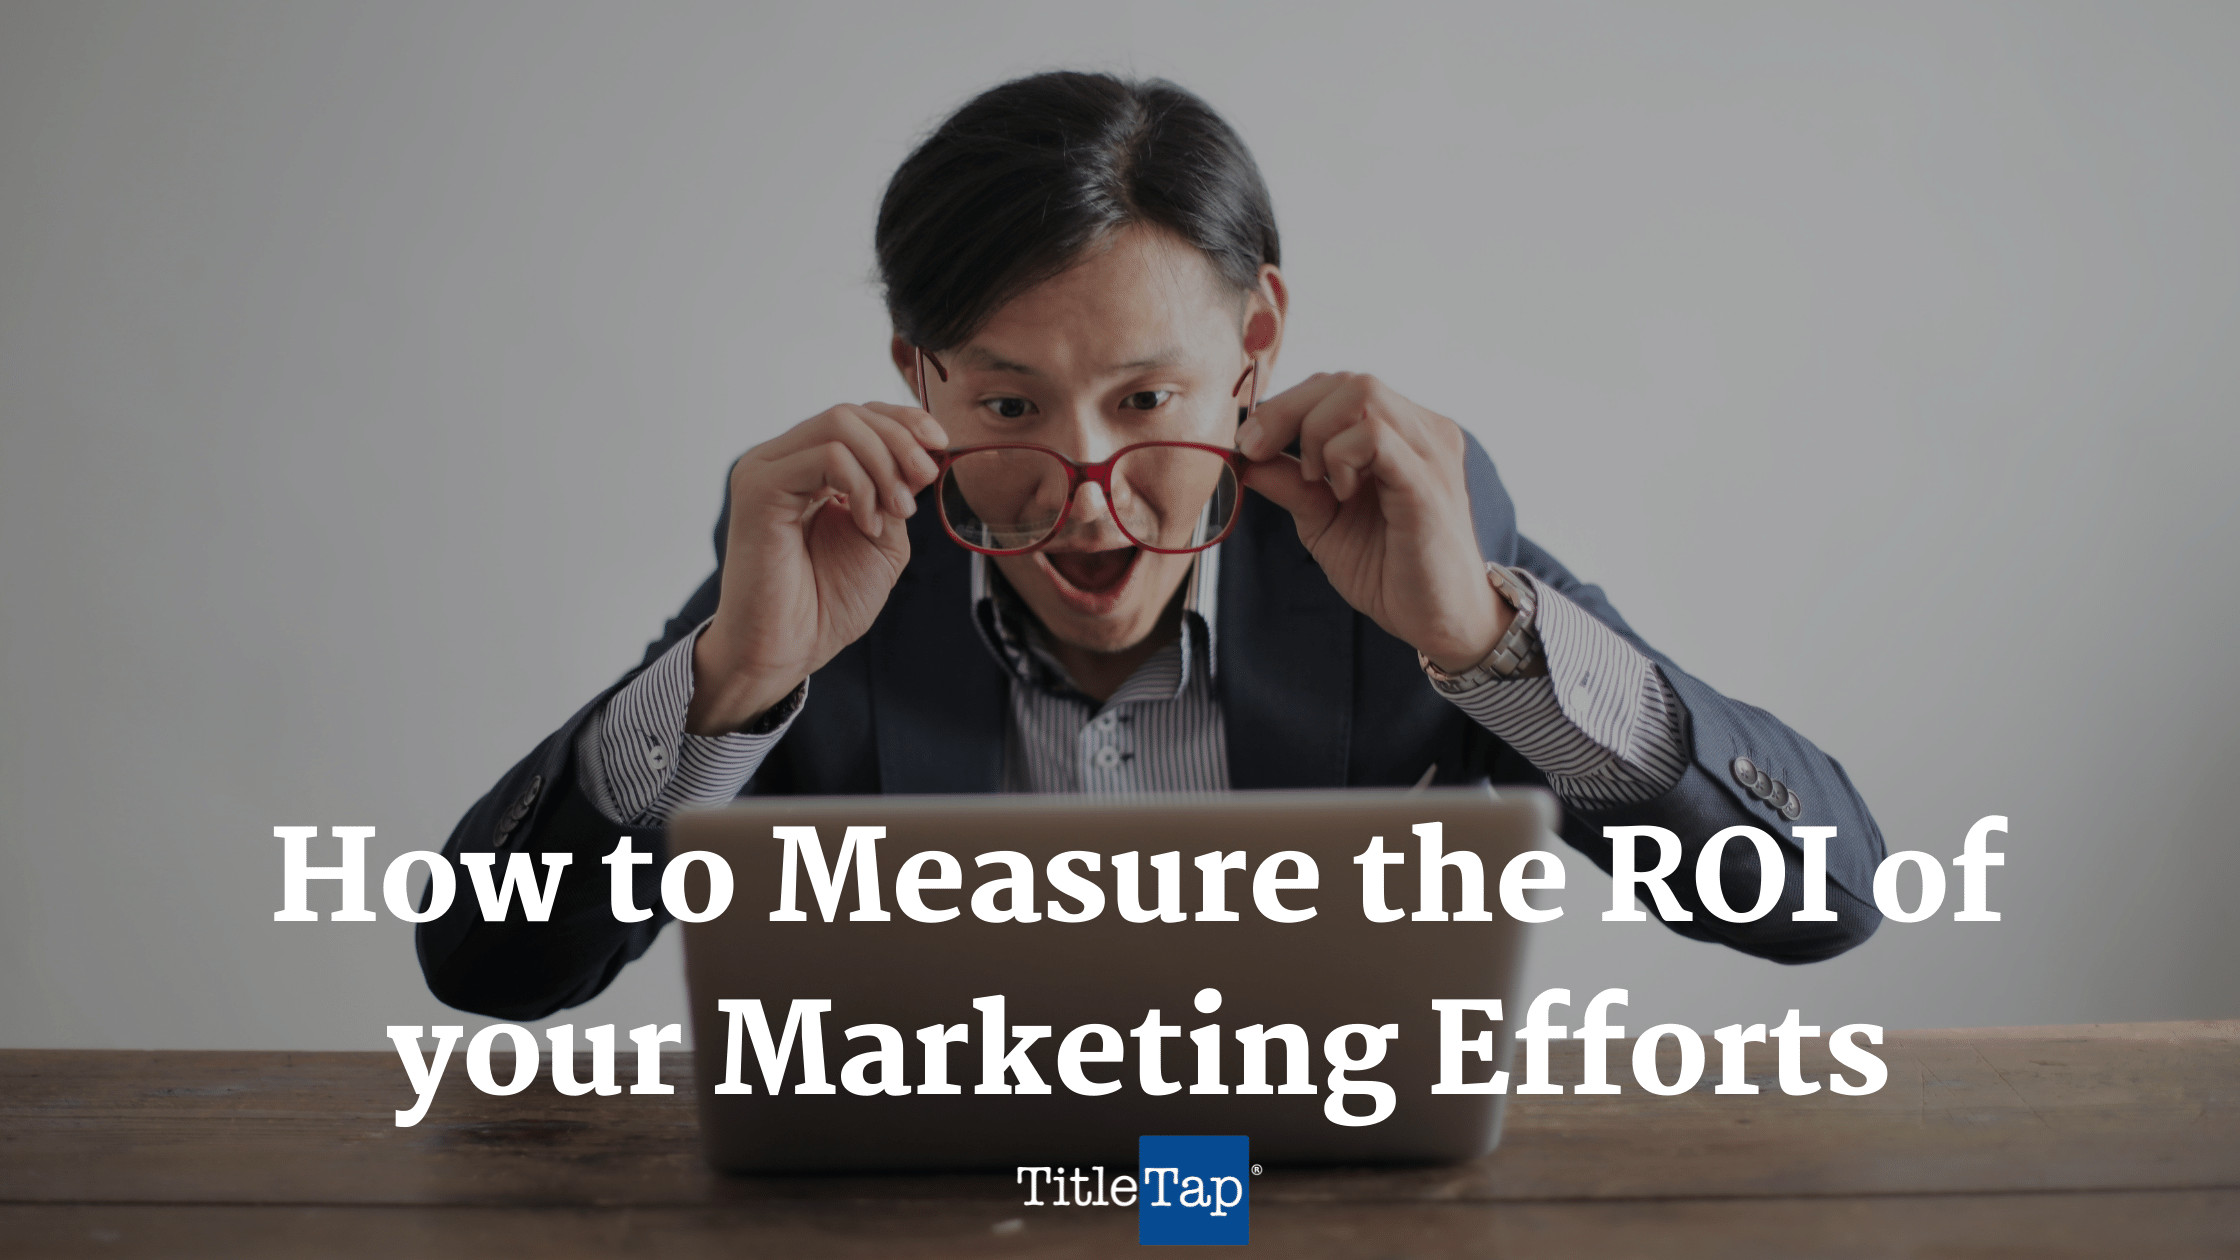 12 Marketing Metrics Your Firm Should Monitor